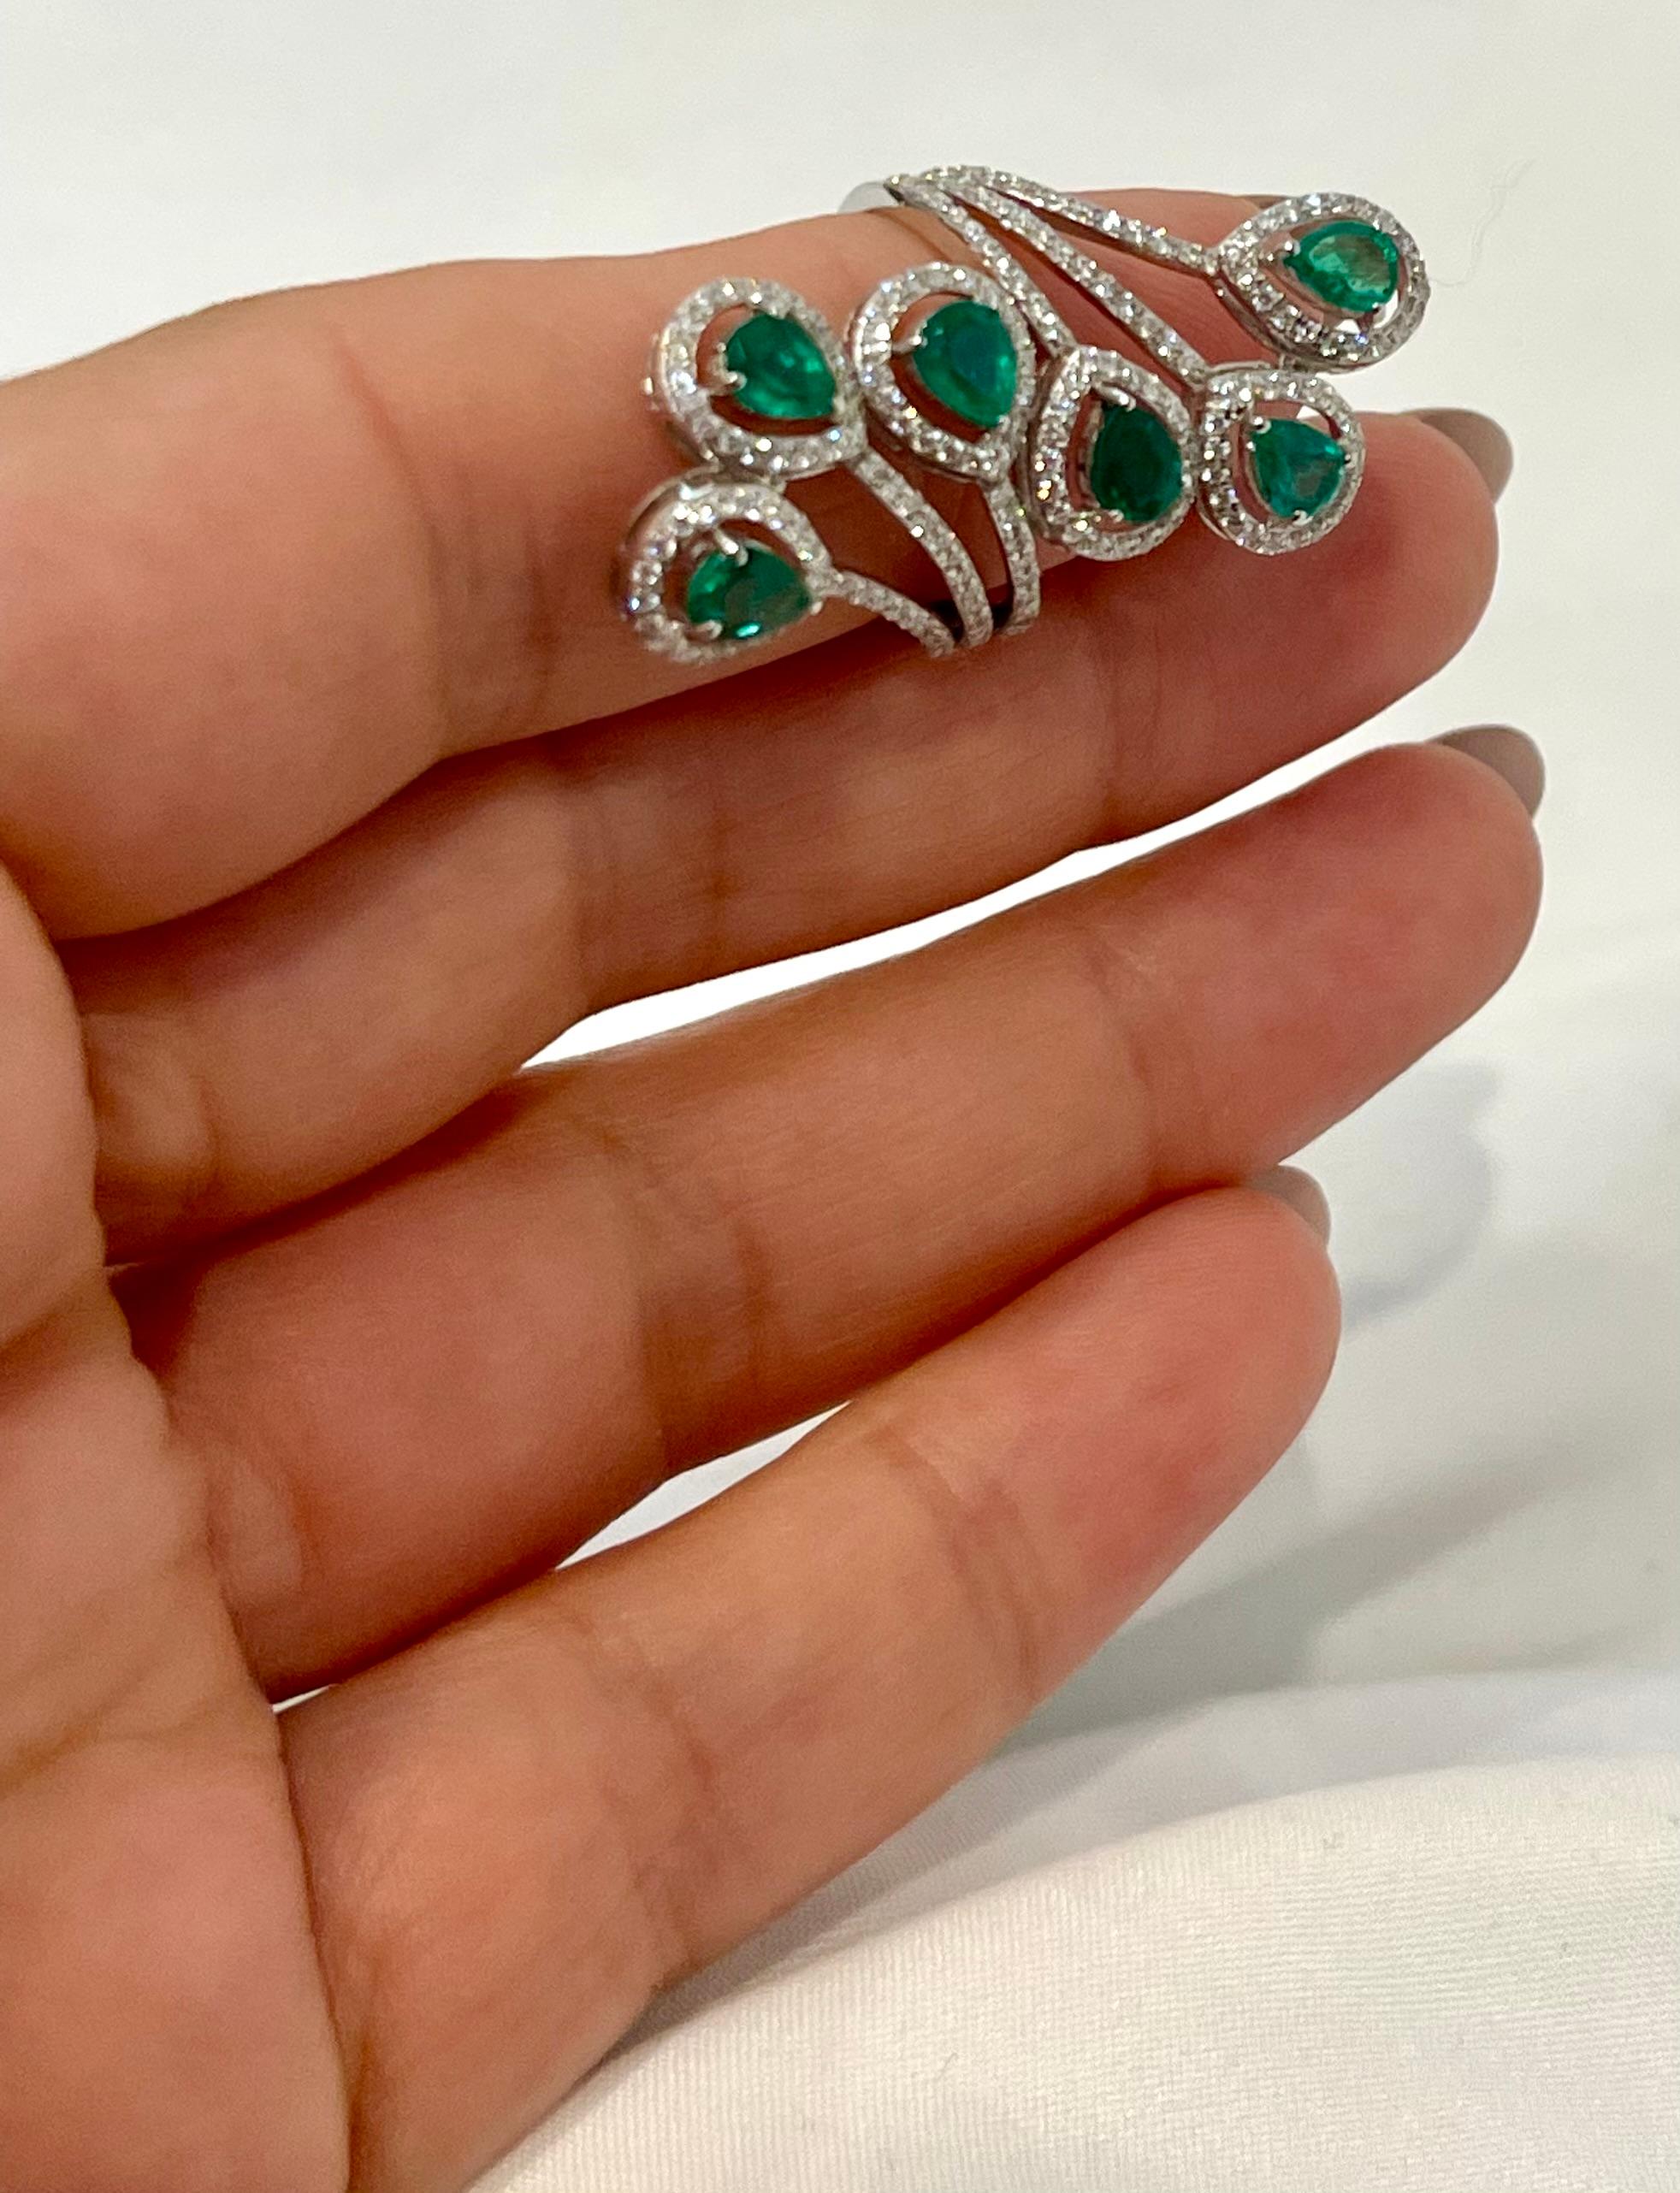 3 Ct Natural  Zambian Emeralds and 1.2 Ct Diamond Ring in 14 karat White Gold For Sale 4